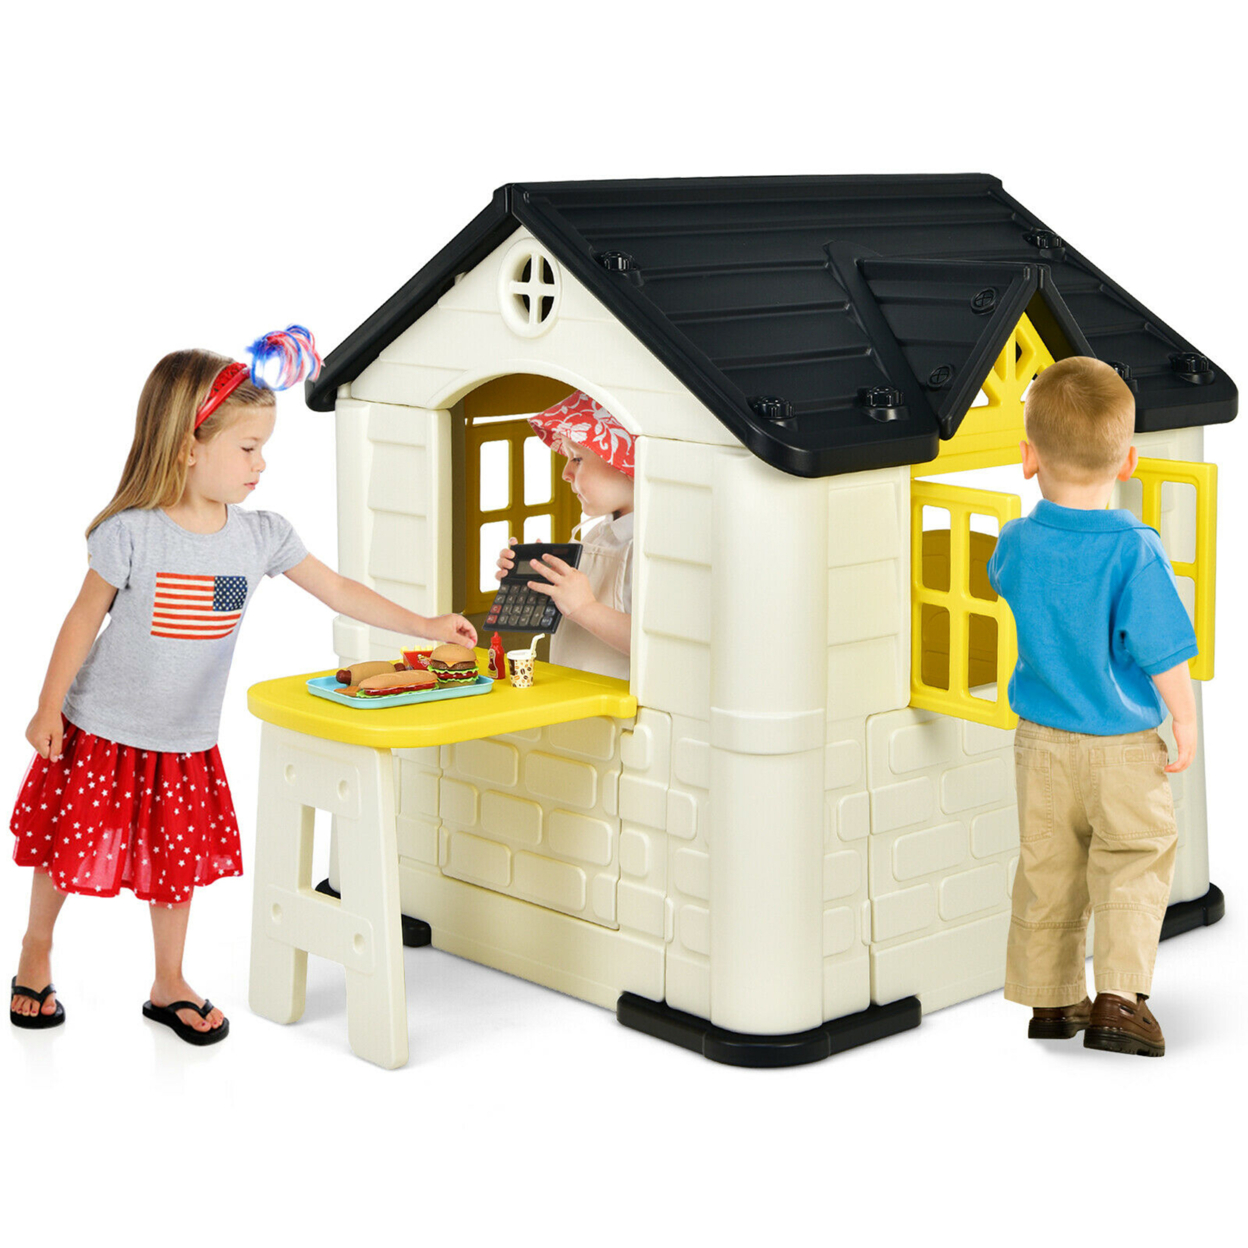 Kid's Playhouse Games Cottage W/ 7 PCS Toy Set & Waterproof Cover - Yellow